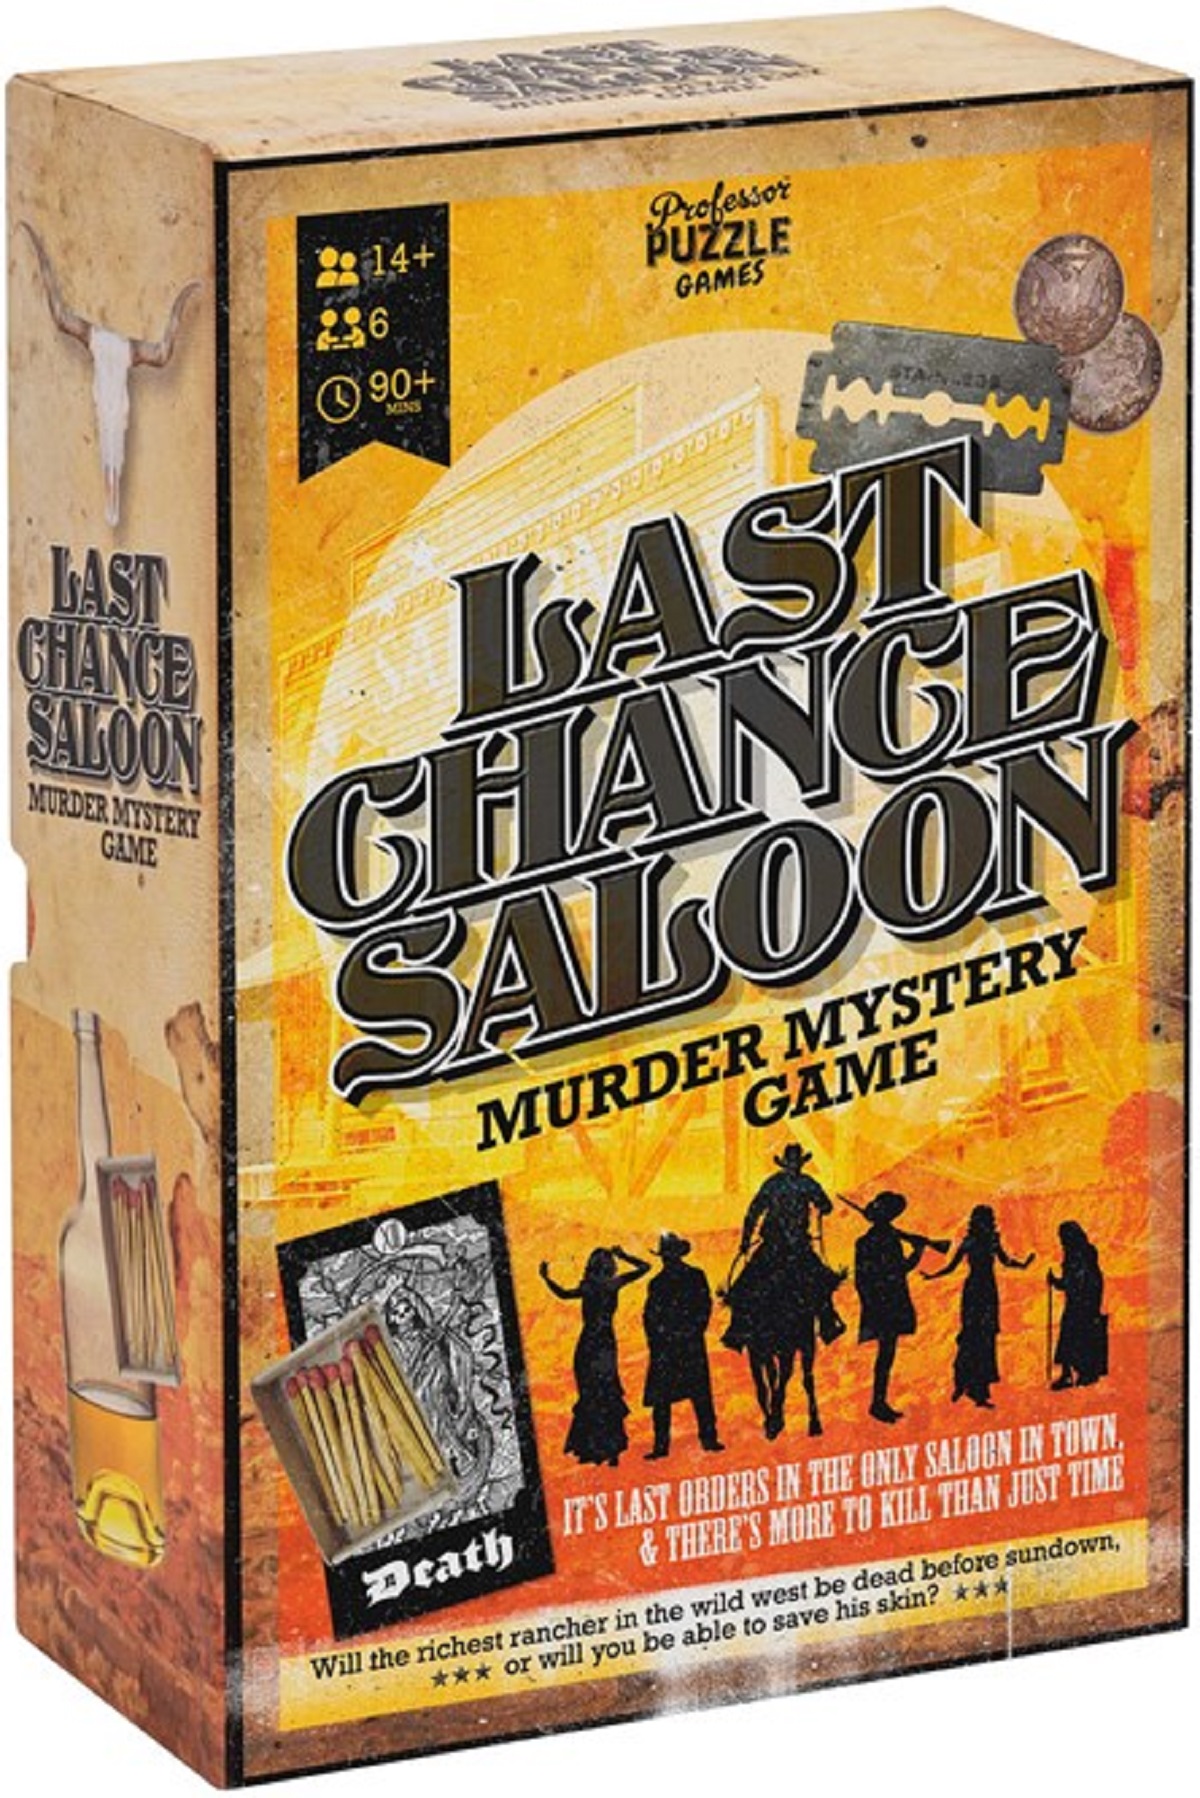 Murder Mystery Game. Last Chance Saloon